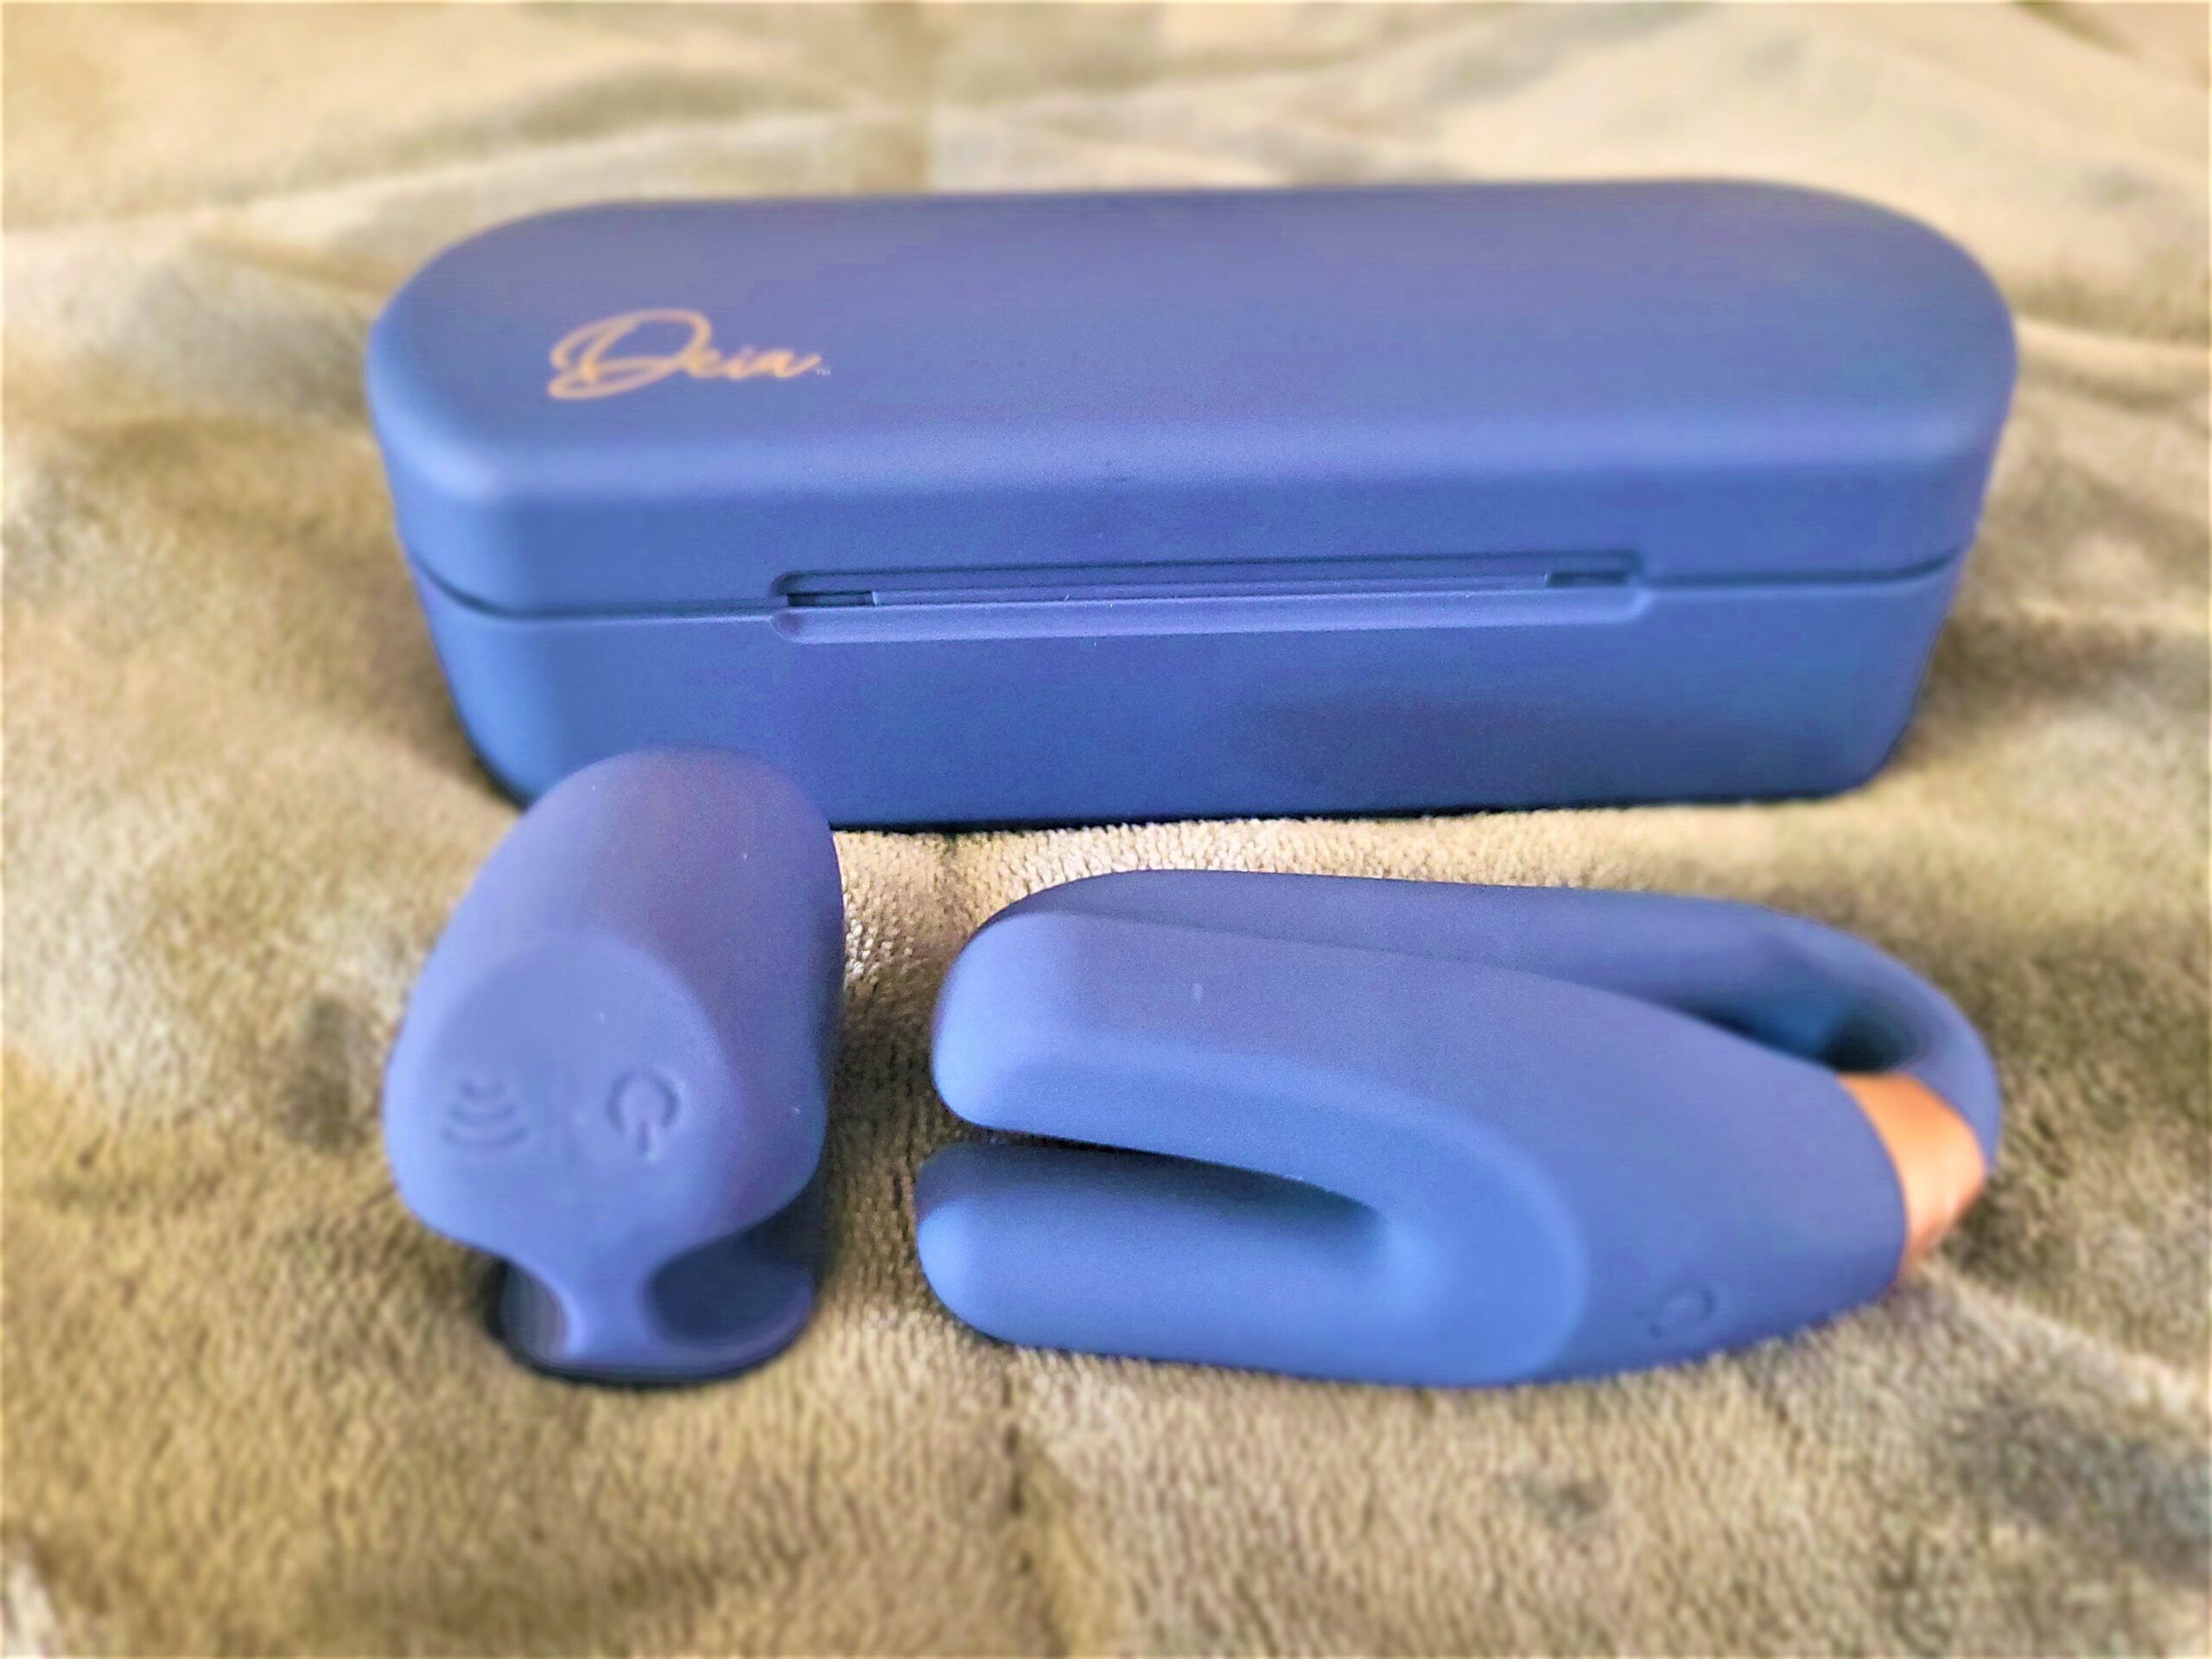 wearable sex toy, better than men sex toys